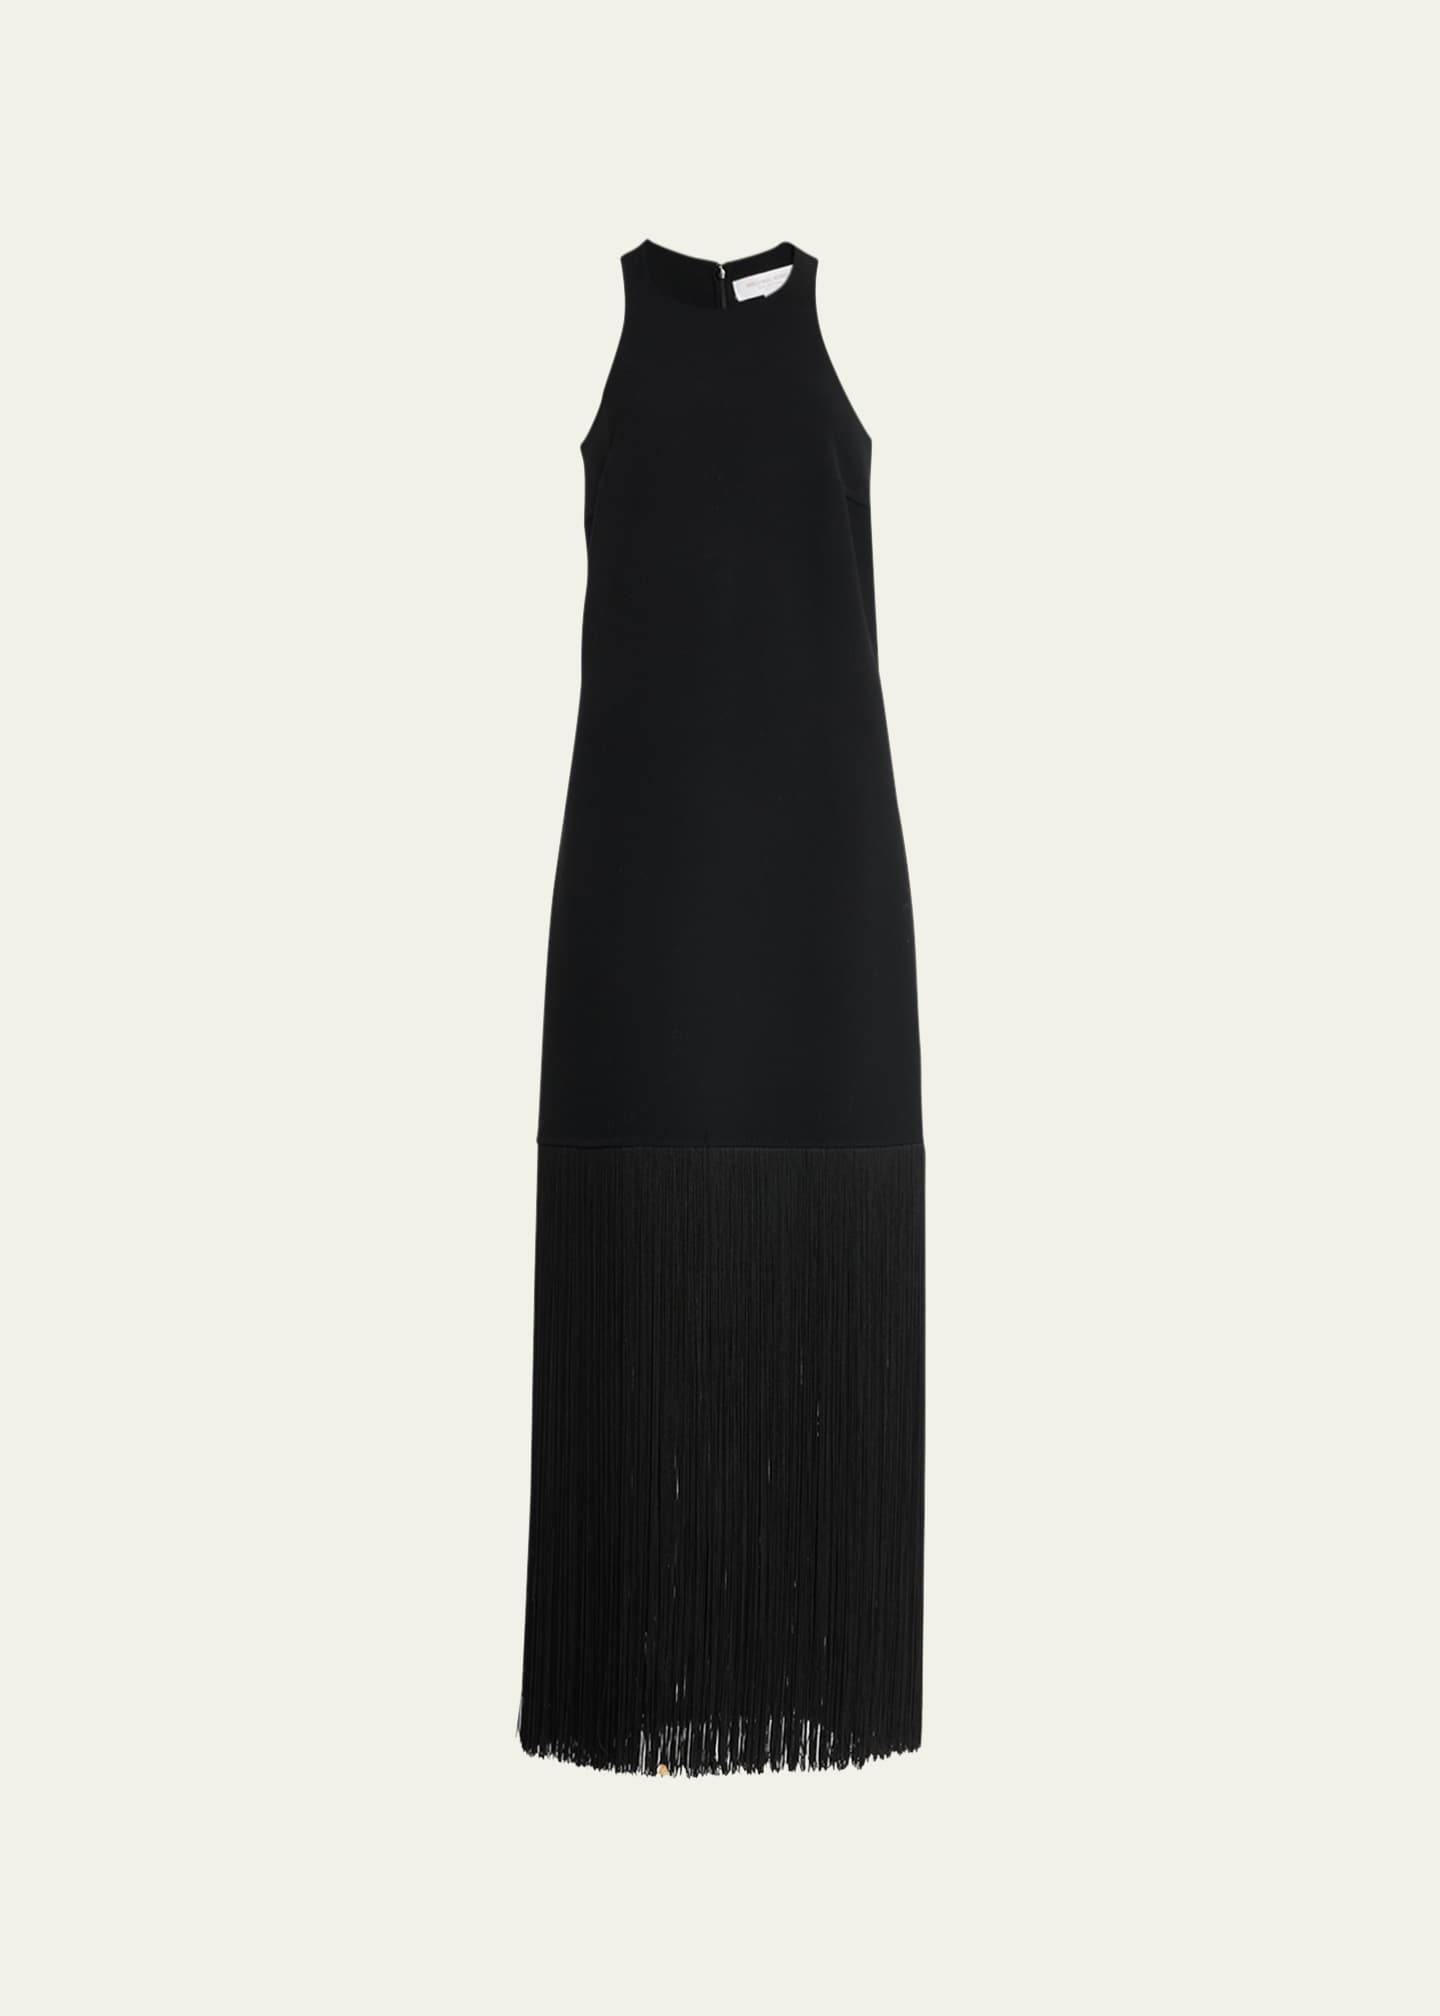 Marty Fielding Taxpayer teater Michael Kors Collection Cut-In Halter Maxi Dress with Fringe Trim -  Bergdorf Goodman